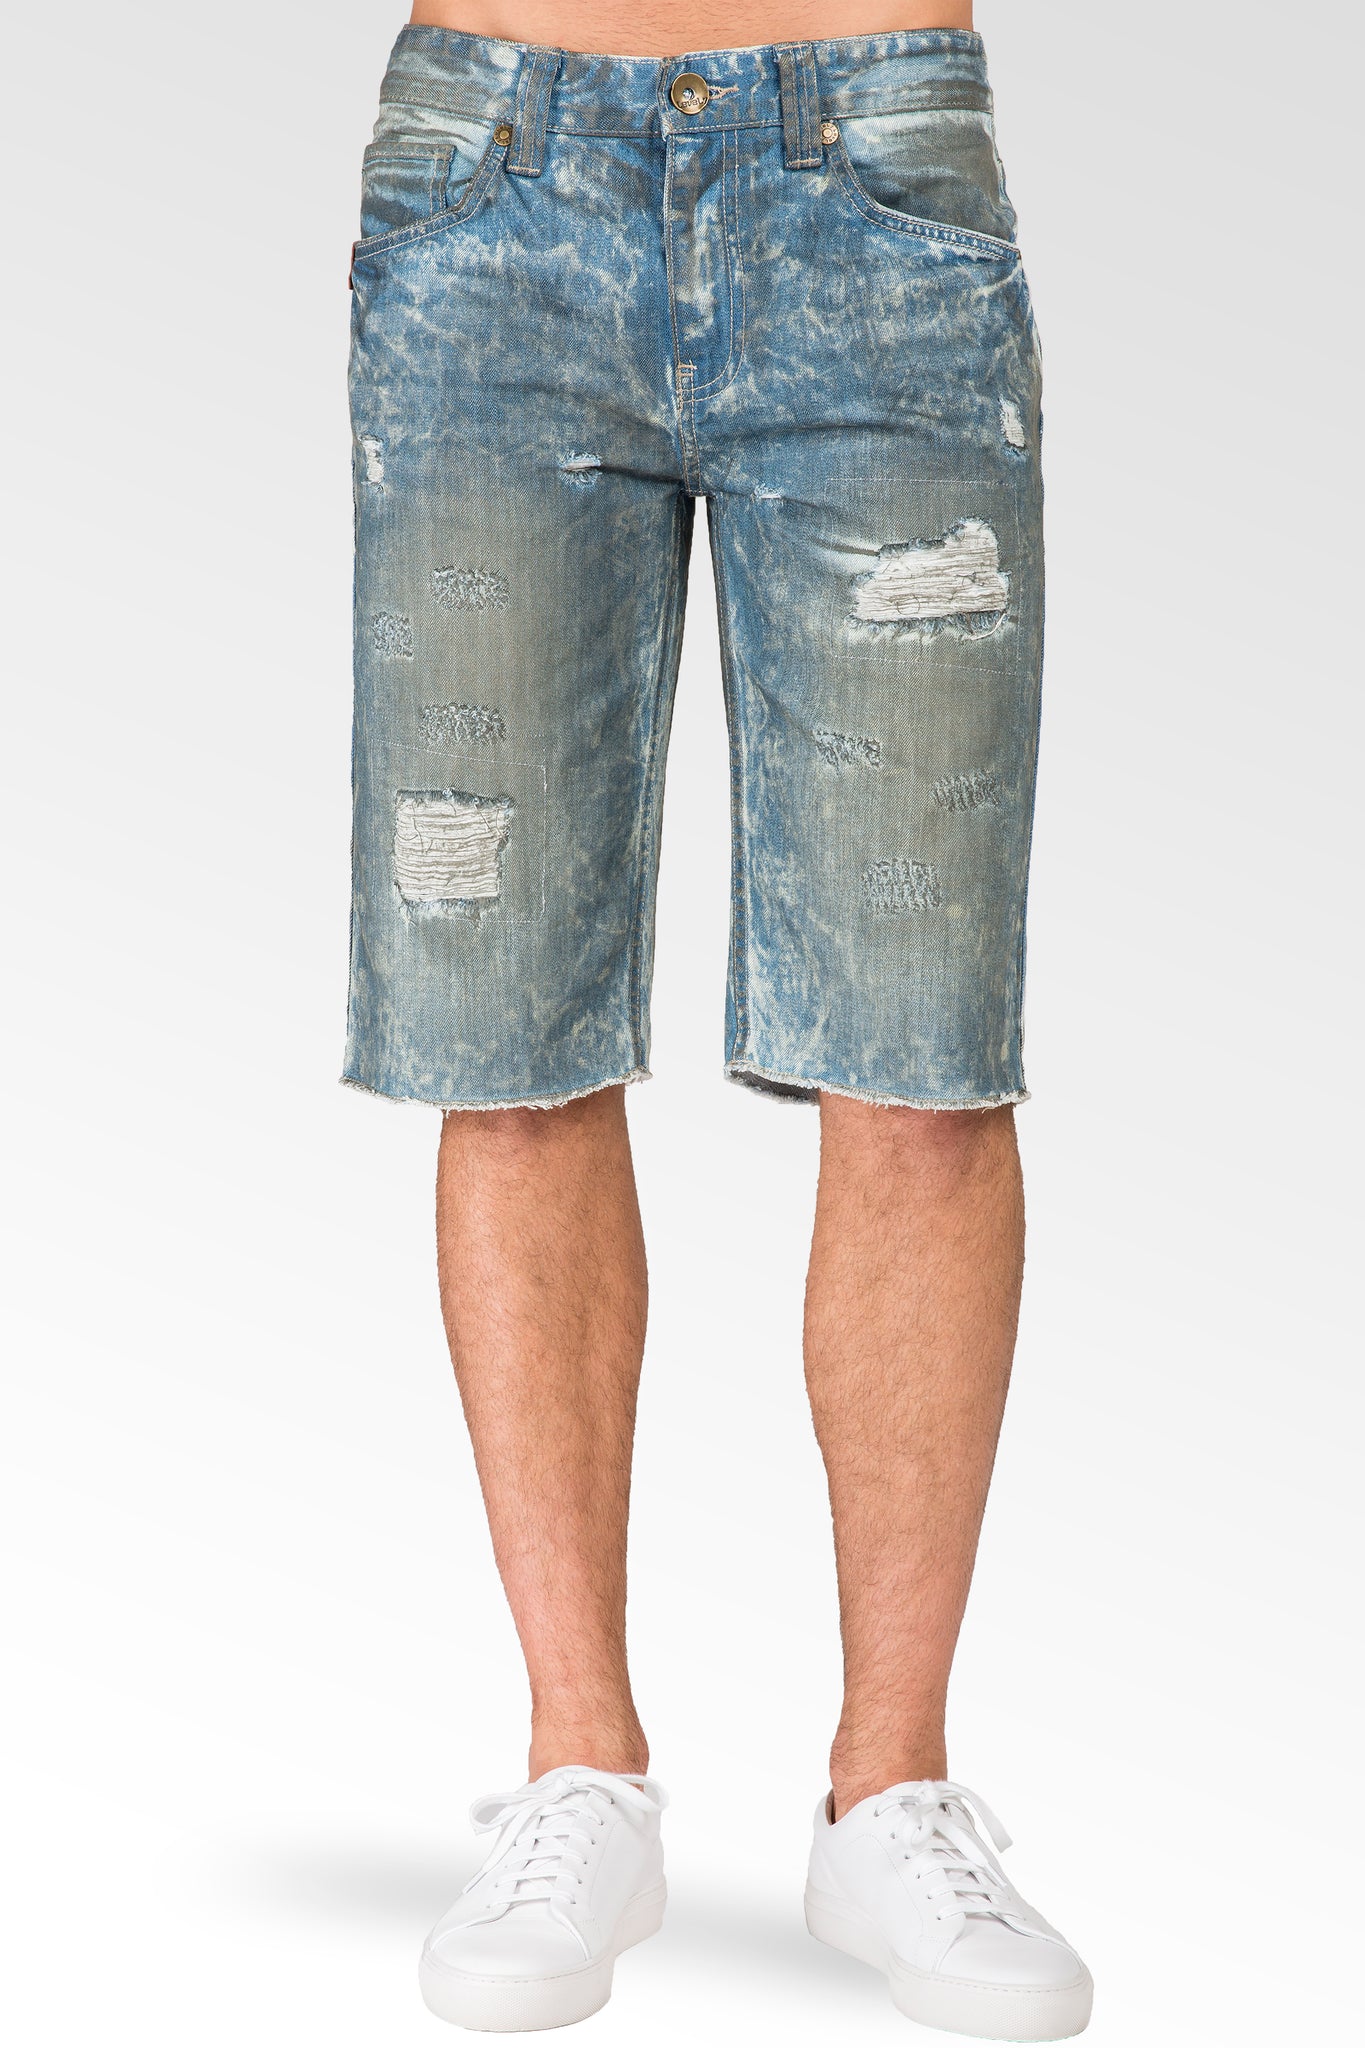 Relaxed Midrise Dirty Bleached Cut Off 13" Premium Denim Shorts Destroyed & Mended